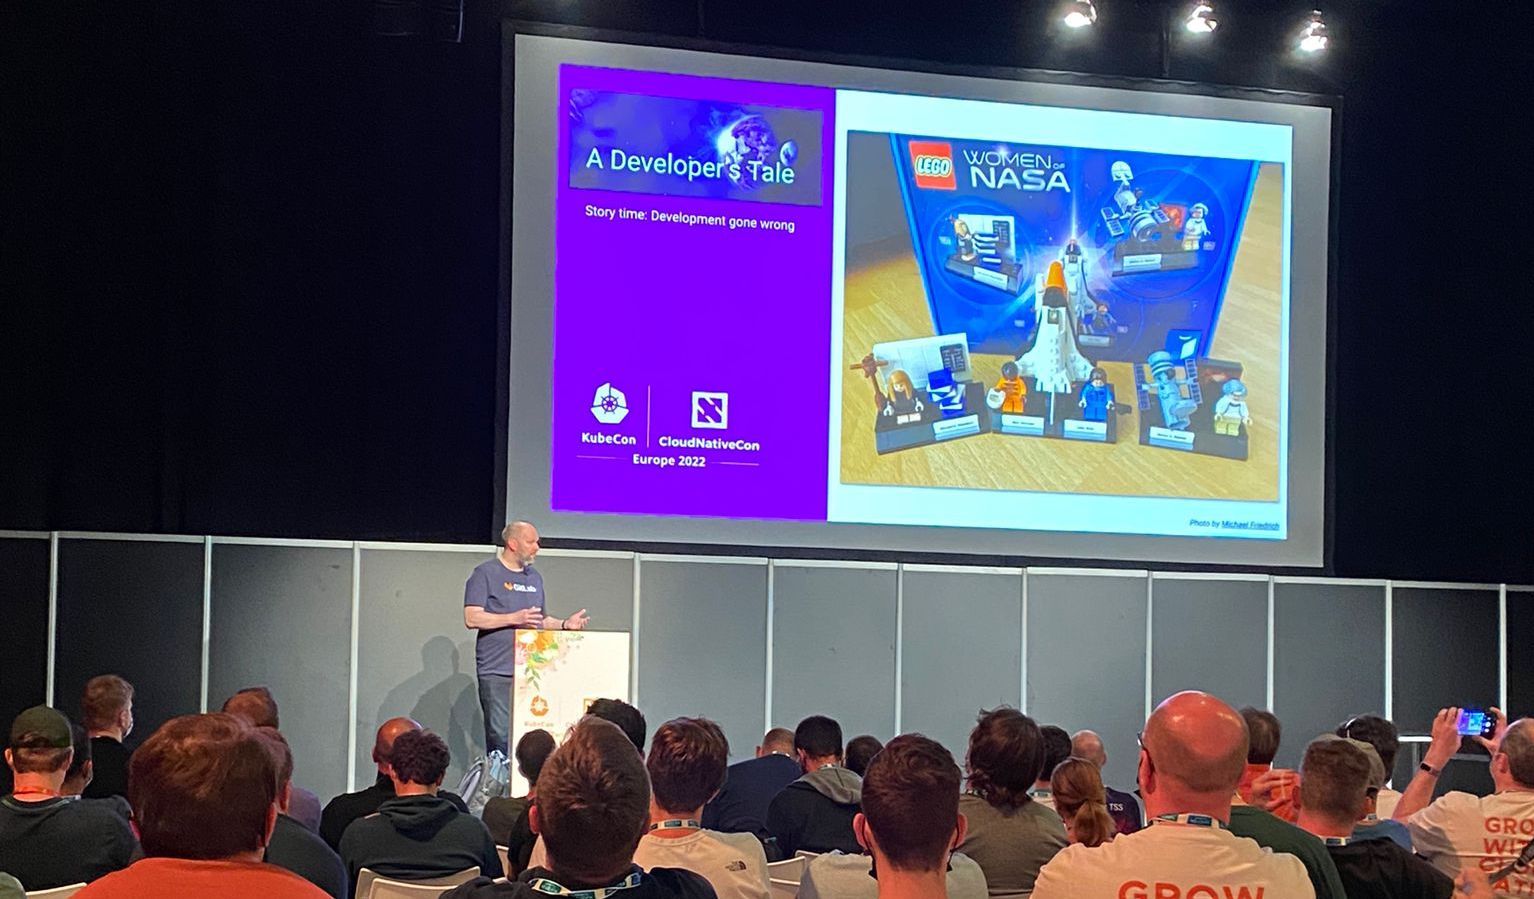 Michael Friedrich, talking about "From Monitoring to Observability: Left Shift your SLOs with Chaos" at KubeCon EU 2022